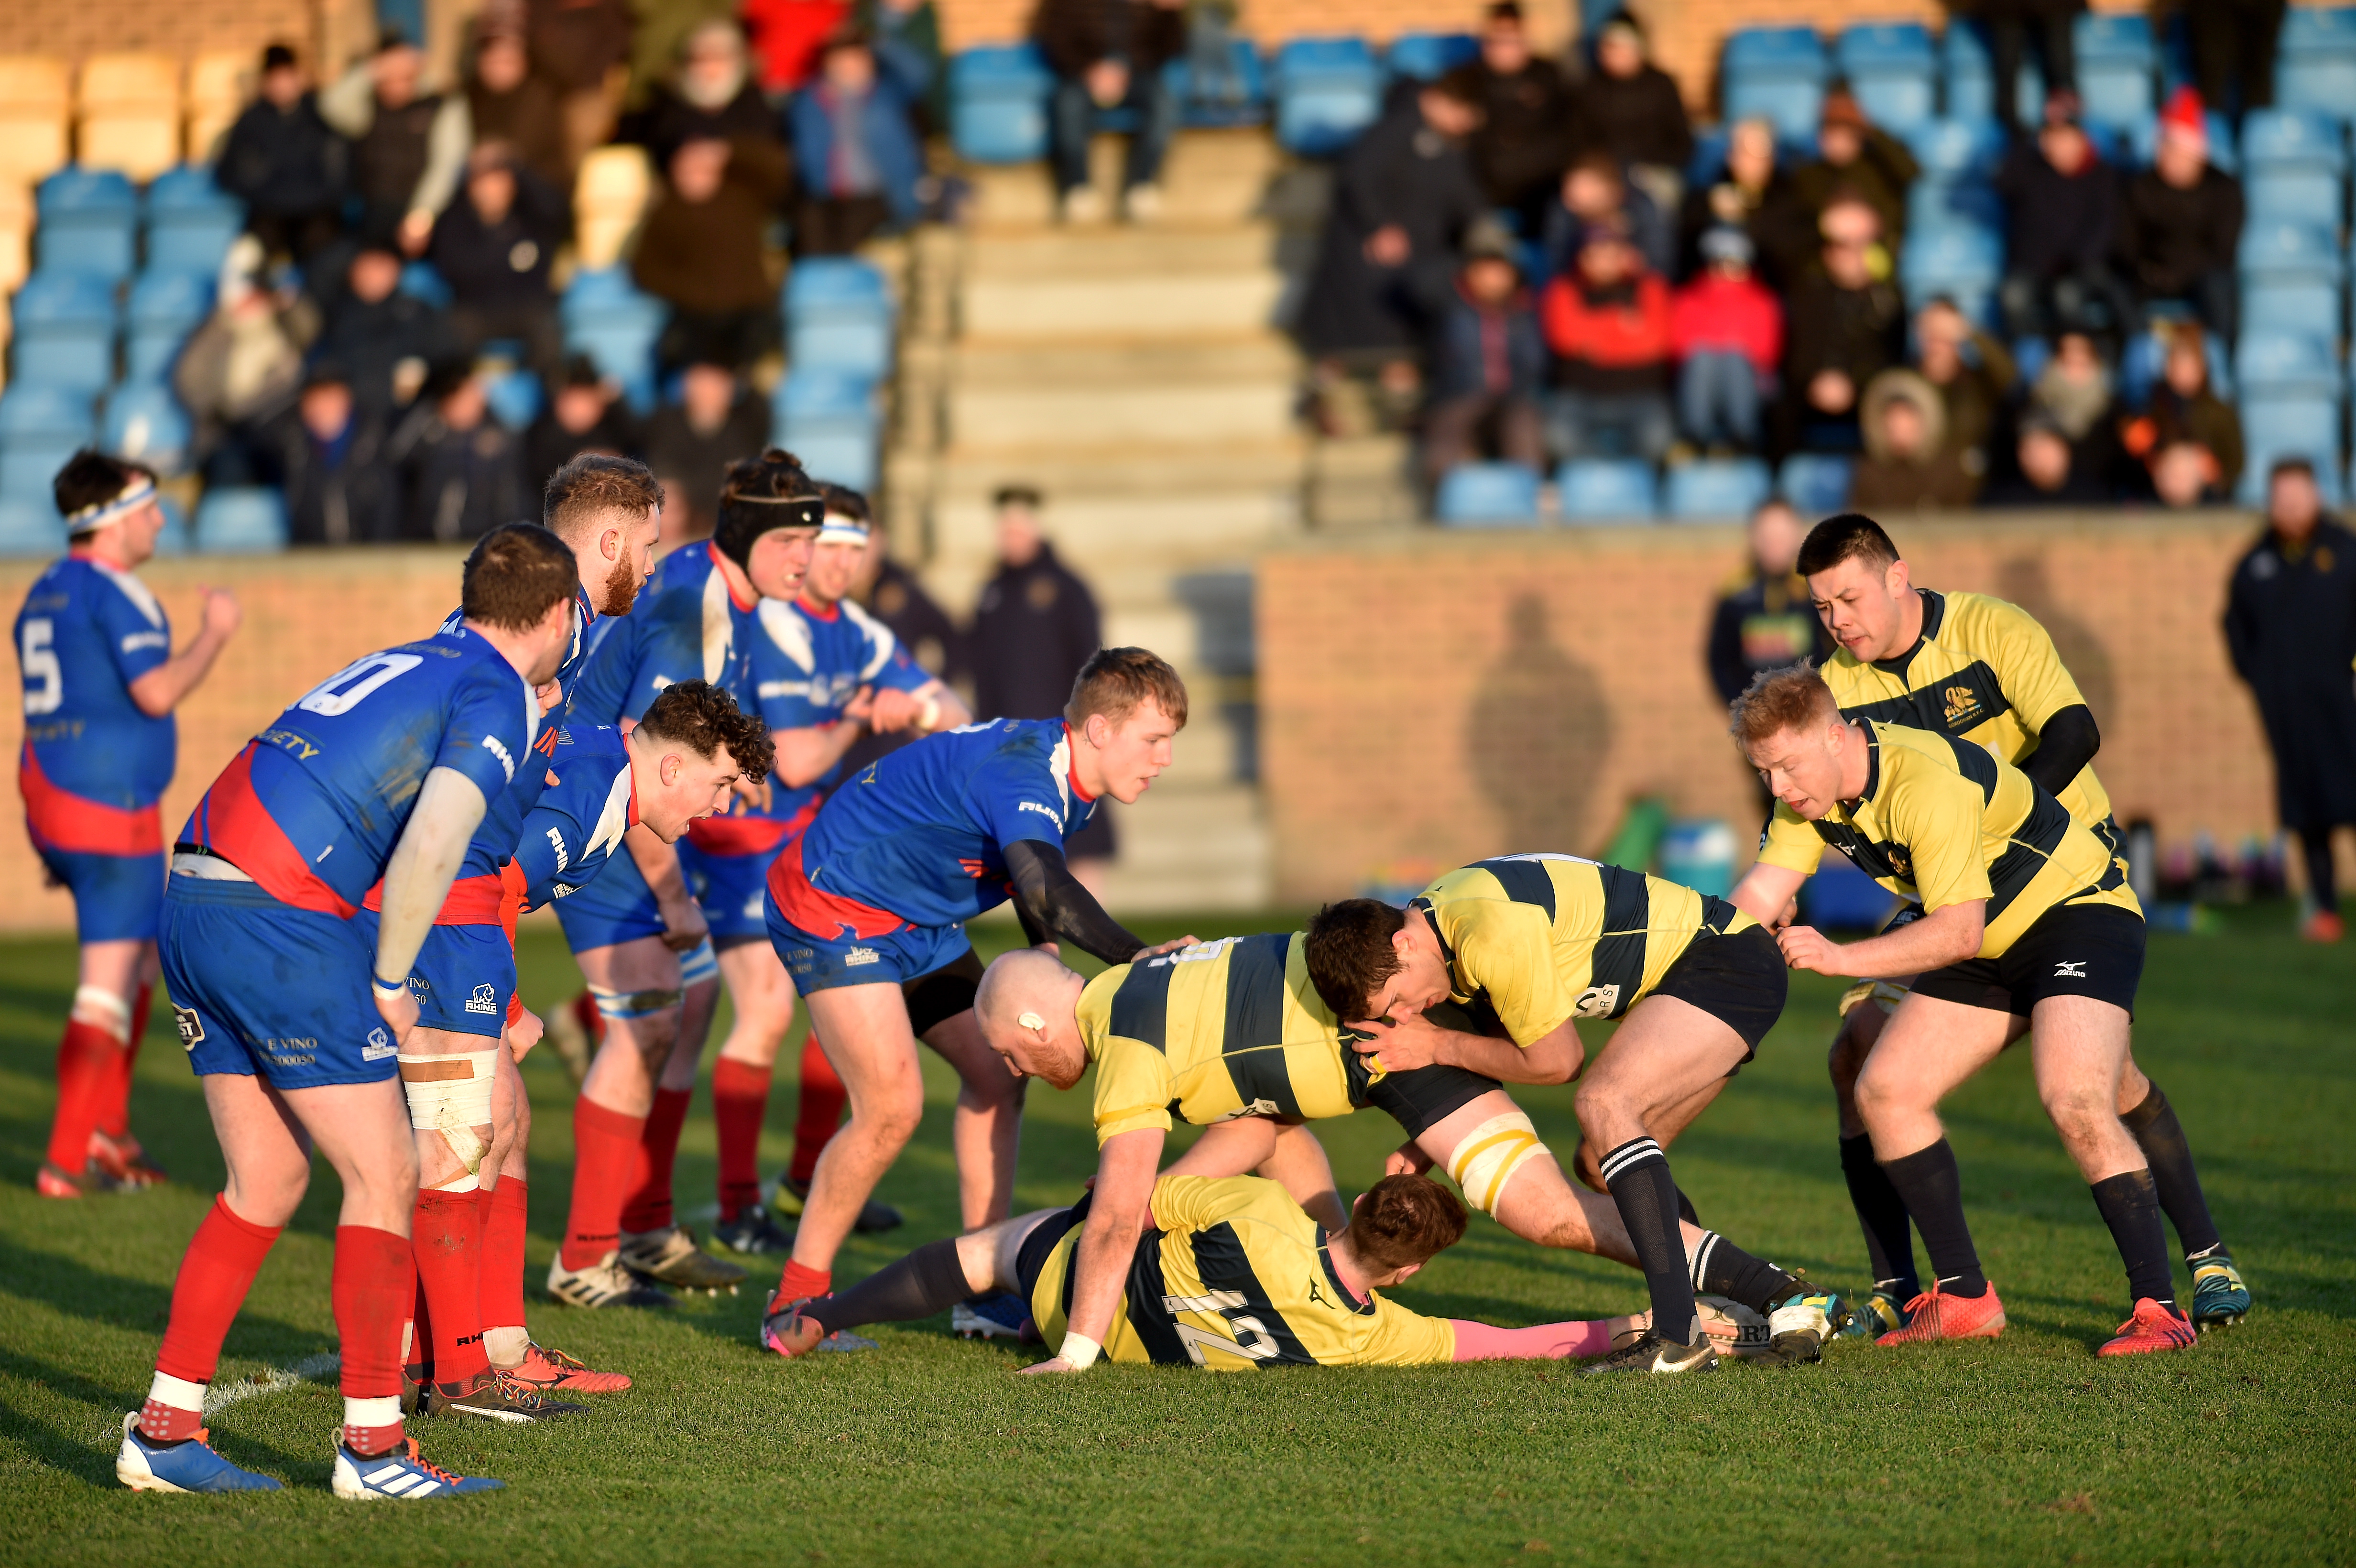 Gordonians were left to rue missed chances. 
Picture by Darrell Benns